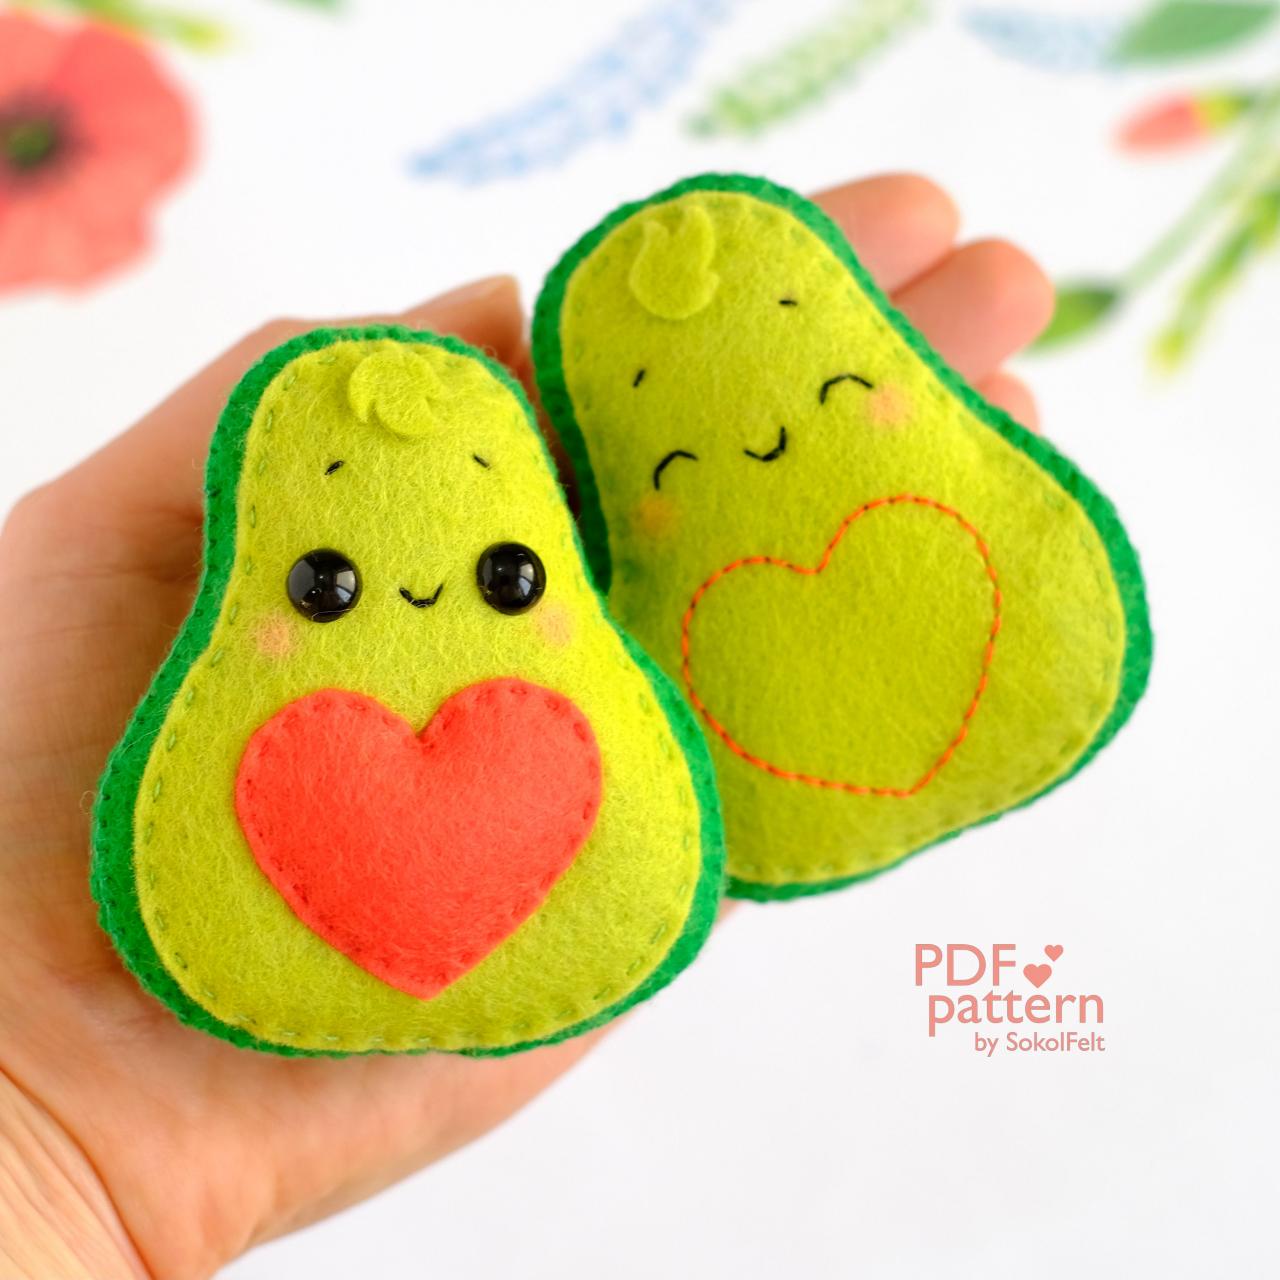 Avocado in love felt toy PDF and SVG patterns, Valentine's Day plush toy sewing tutorials, Cute felt ornament for keychain